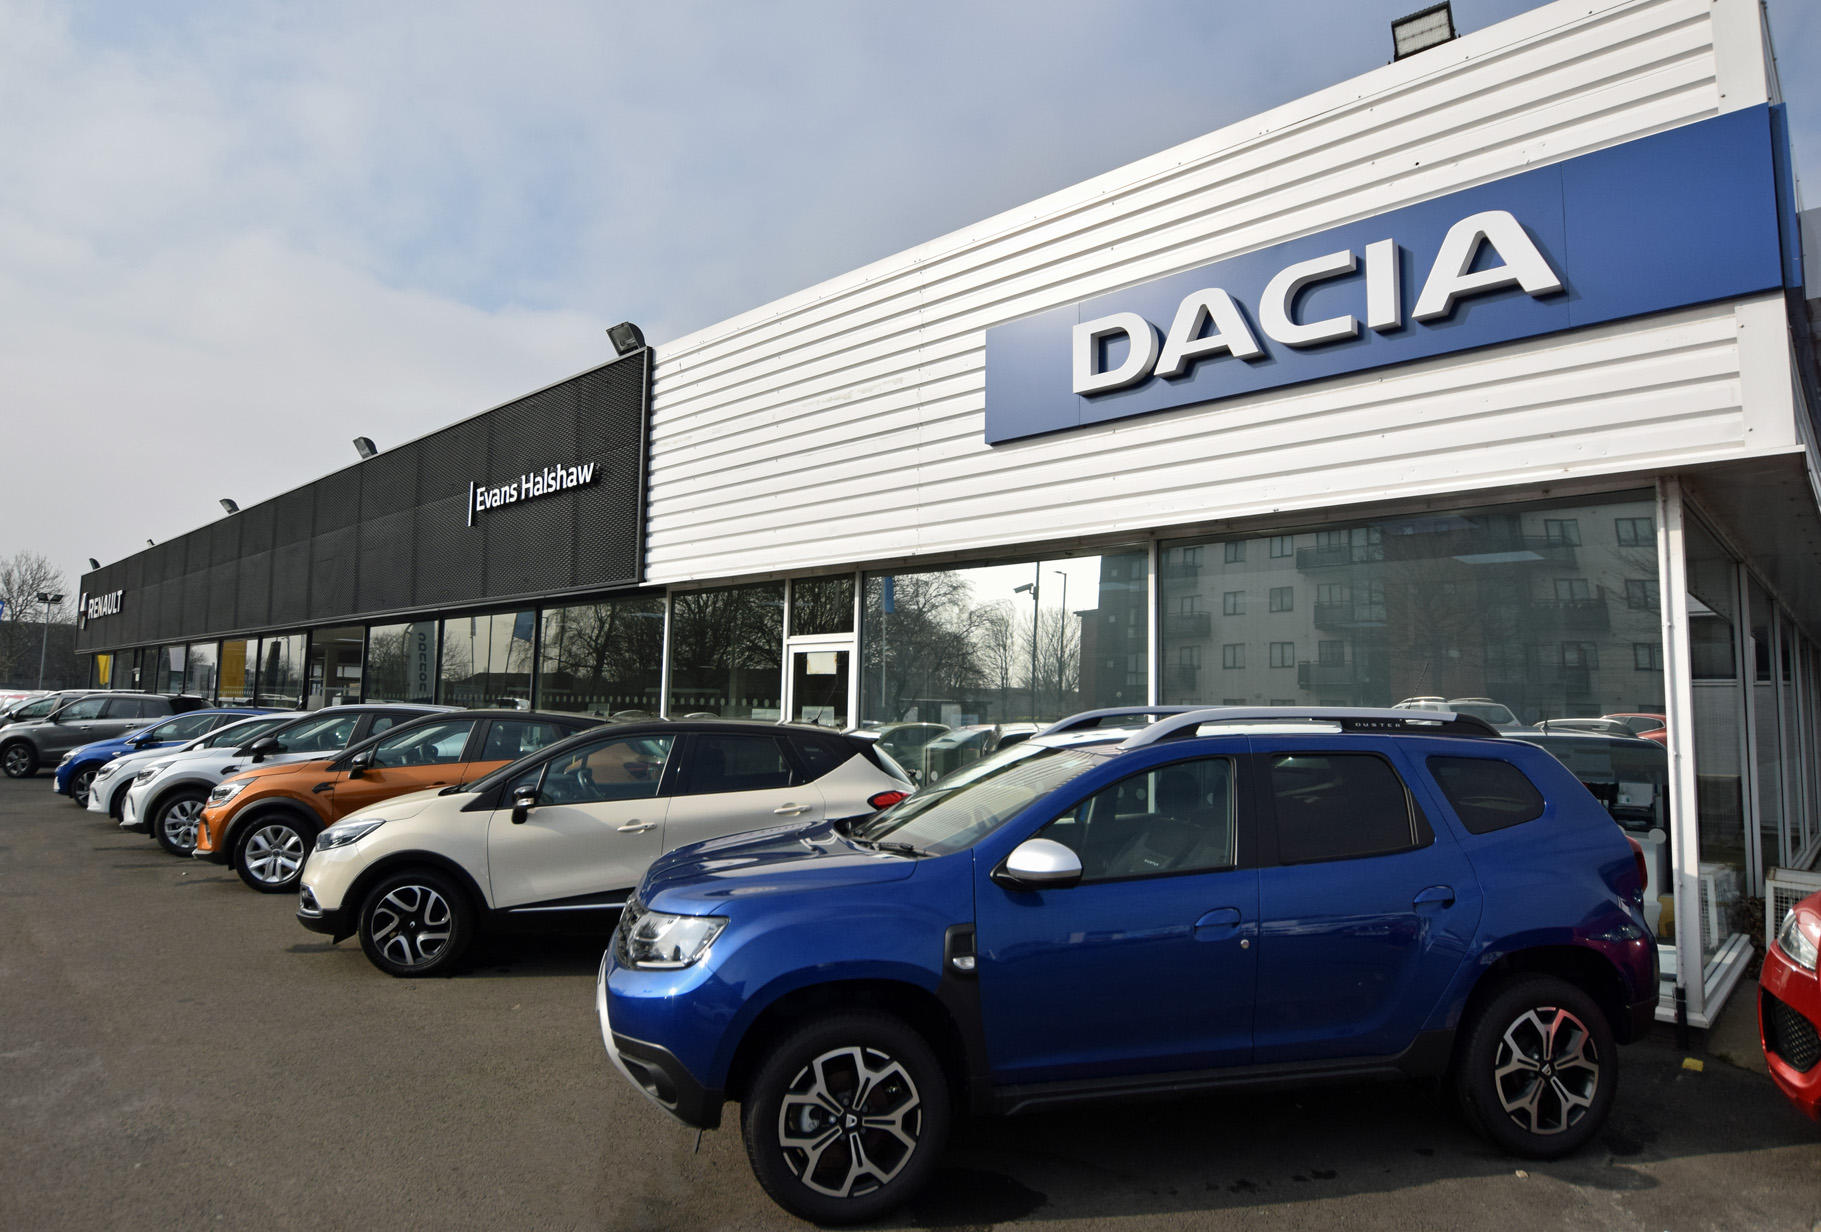 Dacia outside the front of the Middlesbrough dealership Evans Halshaw Dacia Middlesbrough Middlesbrough 01642 757500